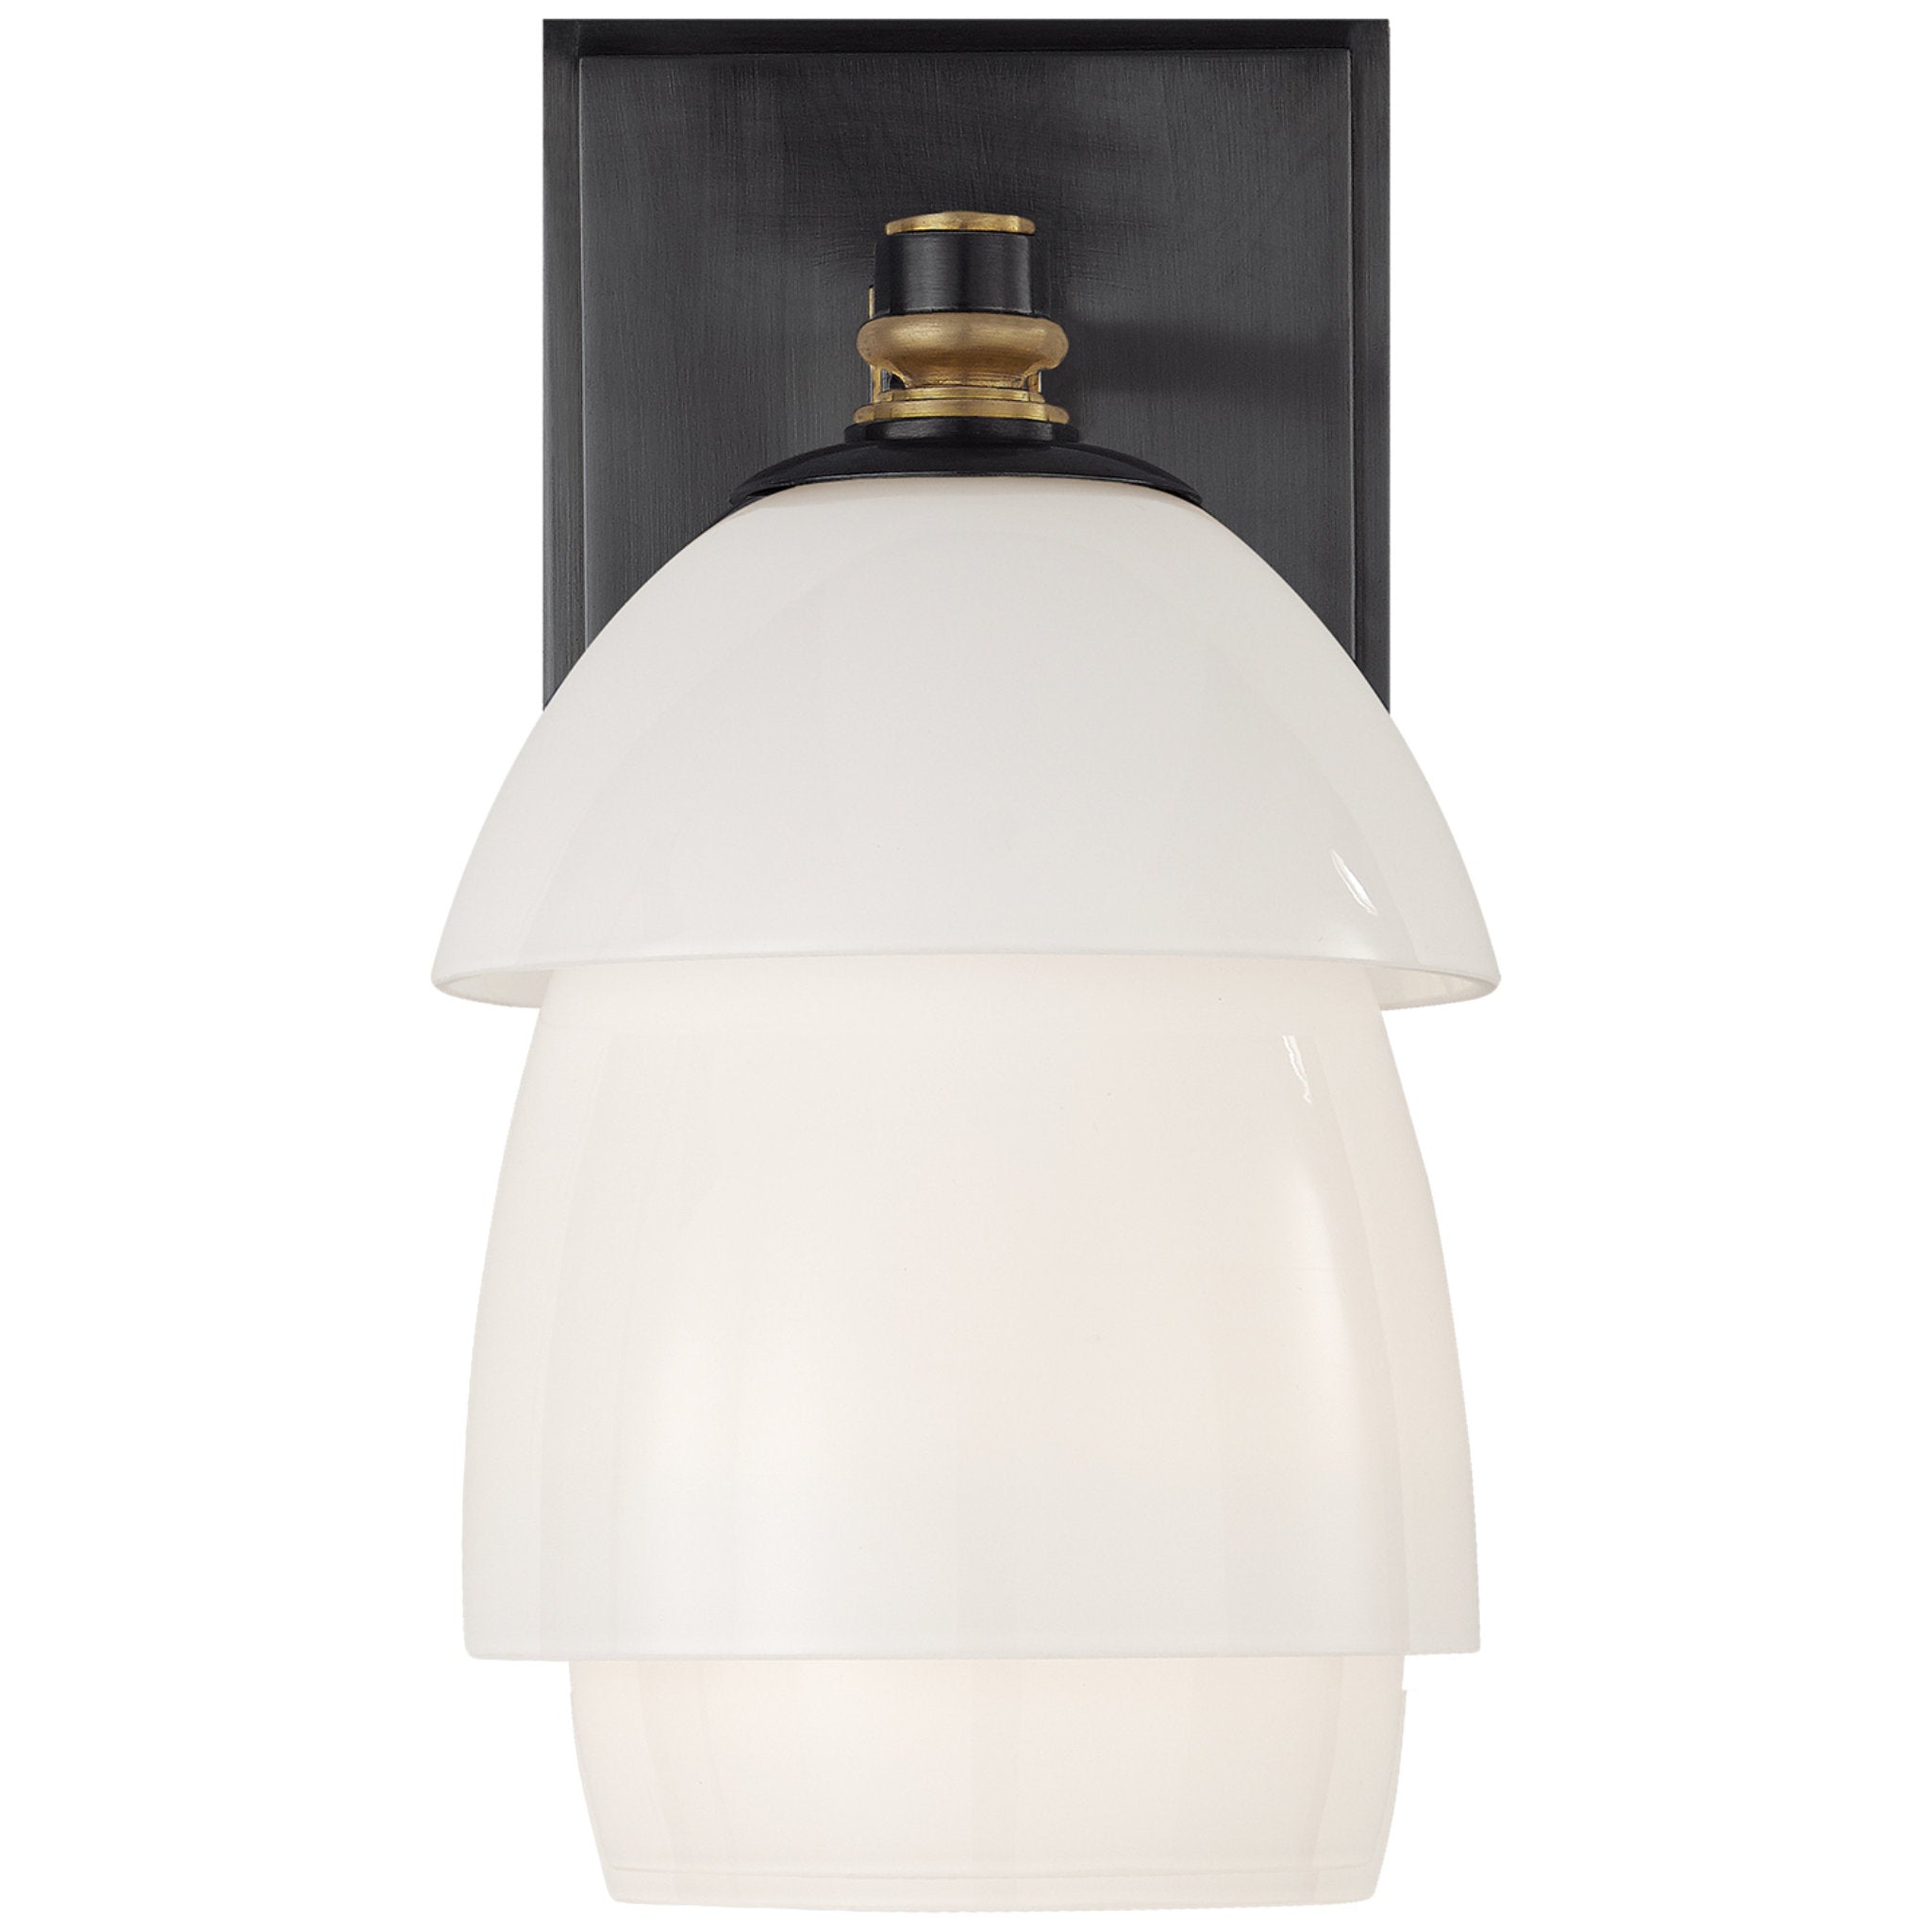 Thomas O'Brien Whitman Small Sconce in Bronze and Hand-Rubbed Antique Brass with White Glass Shade